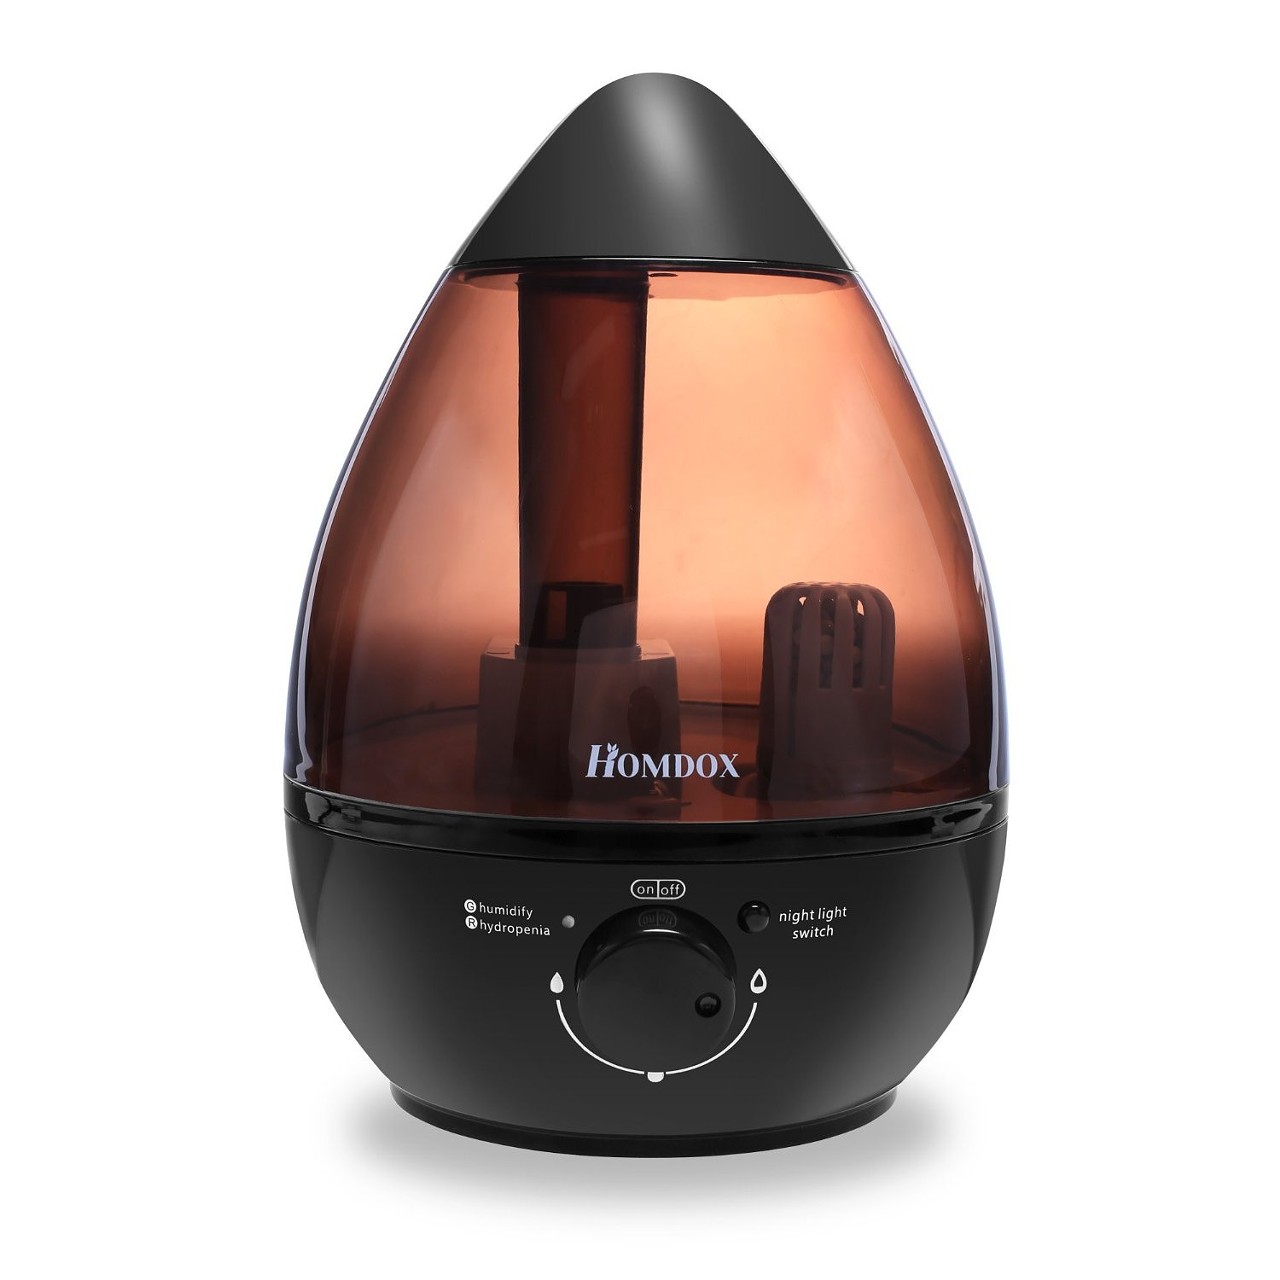  Cool Mist Humidifier. $27.99 (81% off) 
Everyone needs a good humidifier.